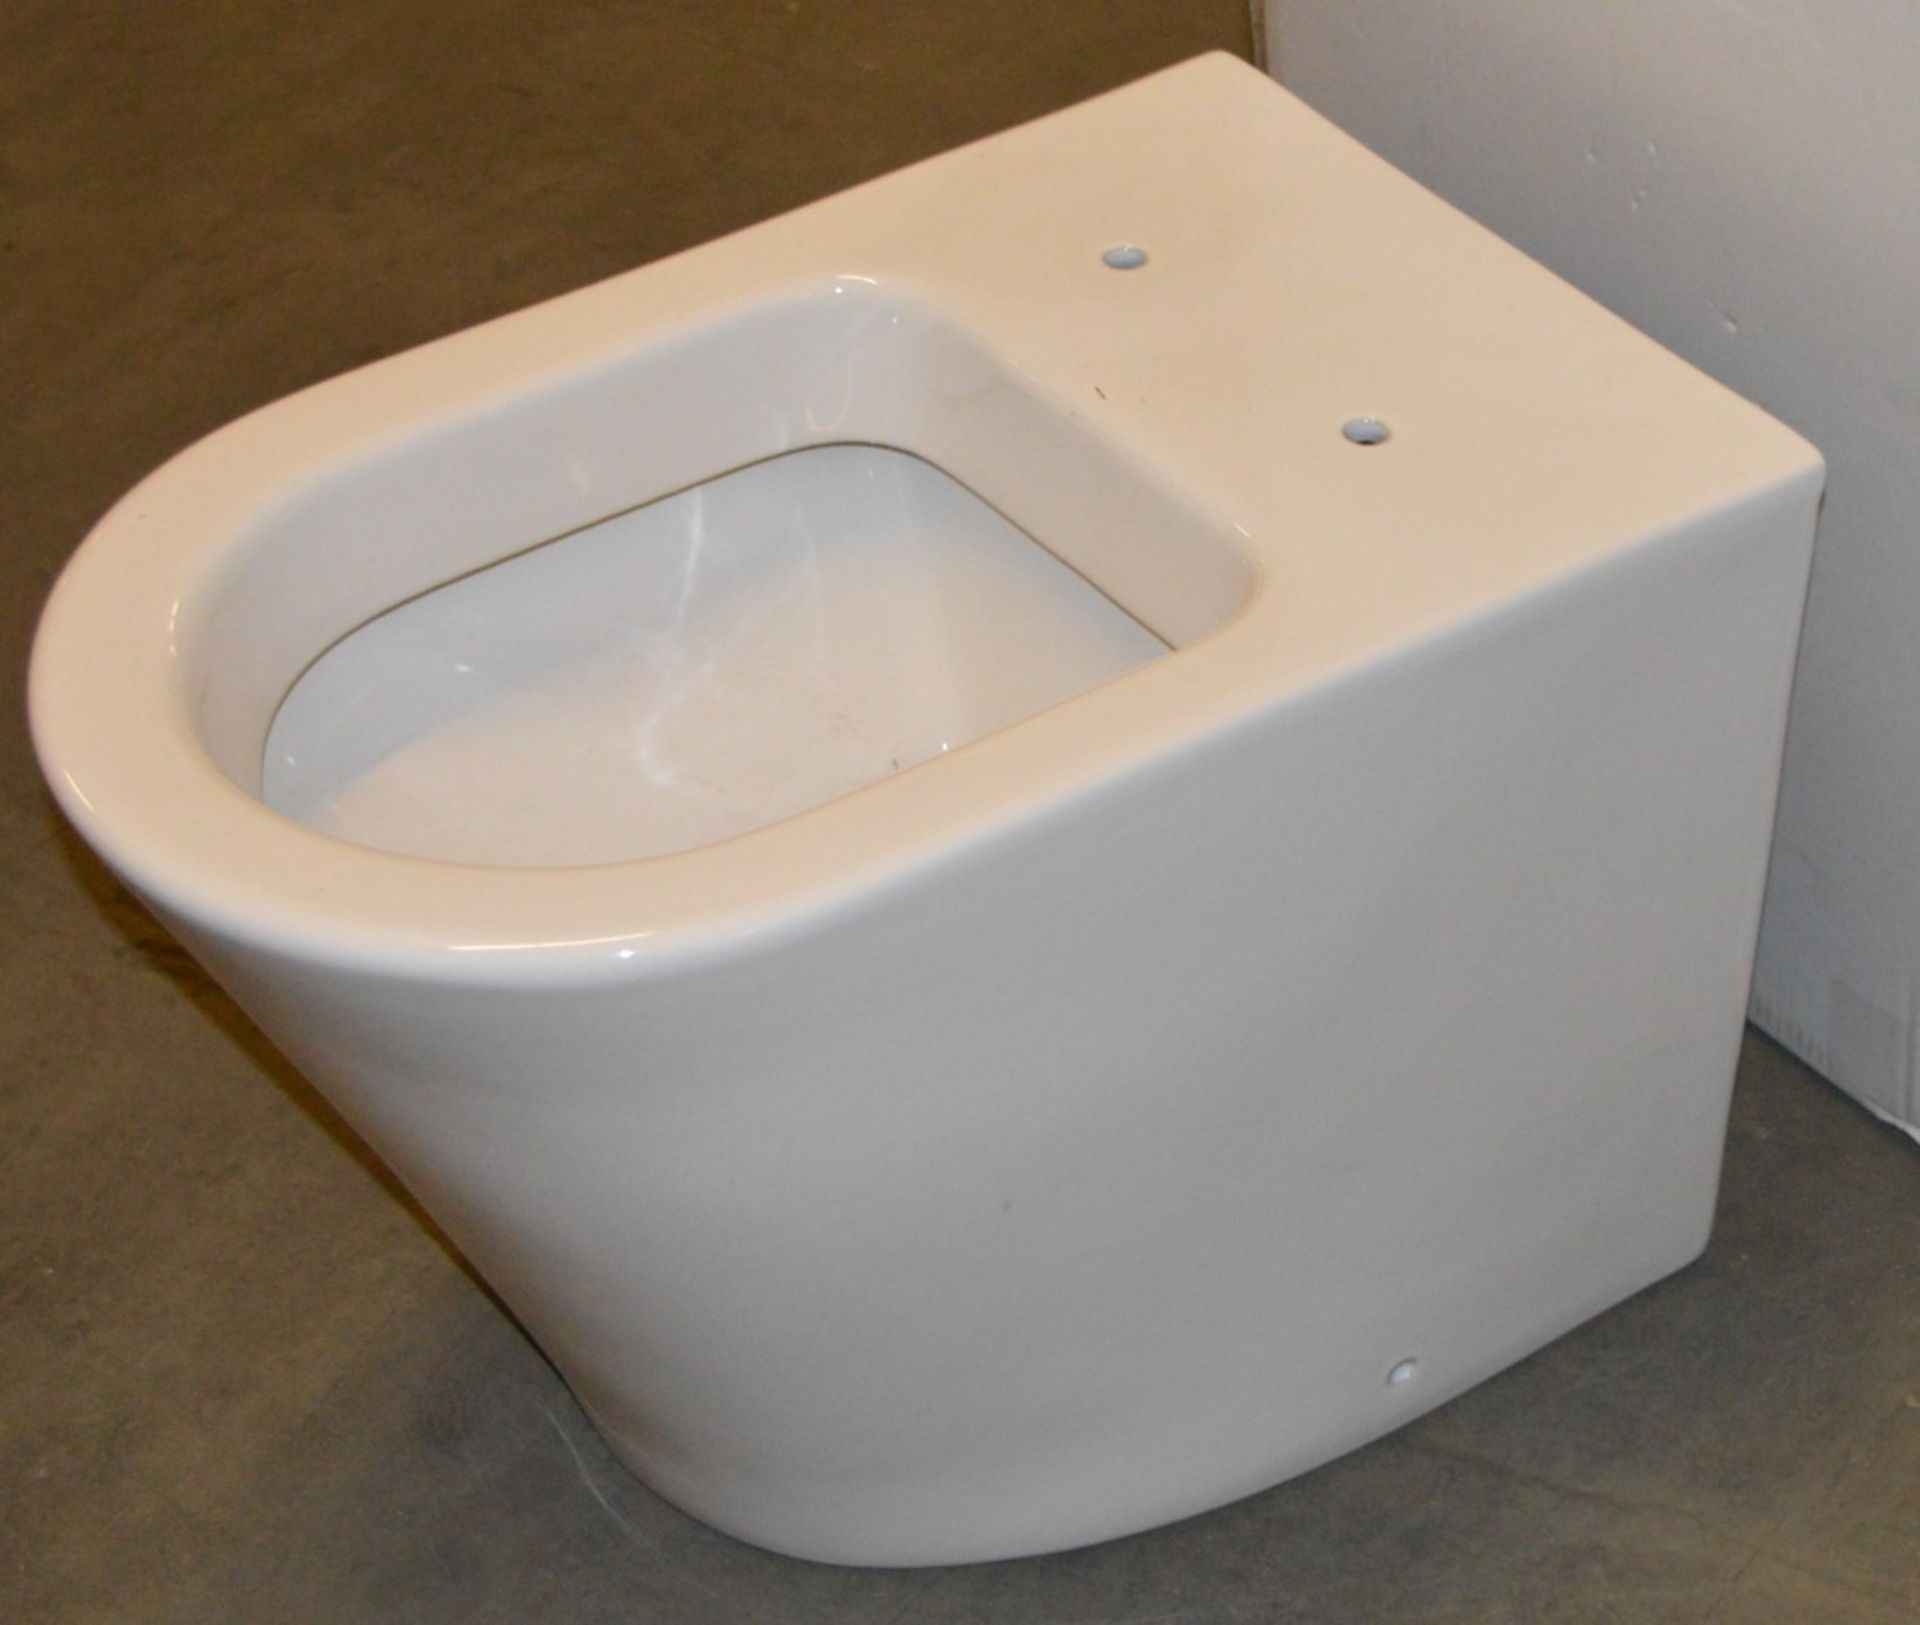 1 x Smart Plan Back to Wall Toilet Unit With Toilet Pan - Walnut Finish - Unused Stock - CL190 - Ref - Image 5 of 5